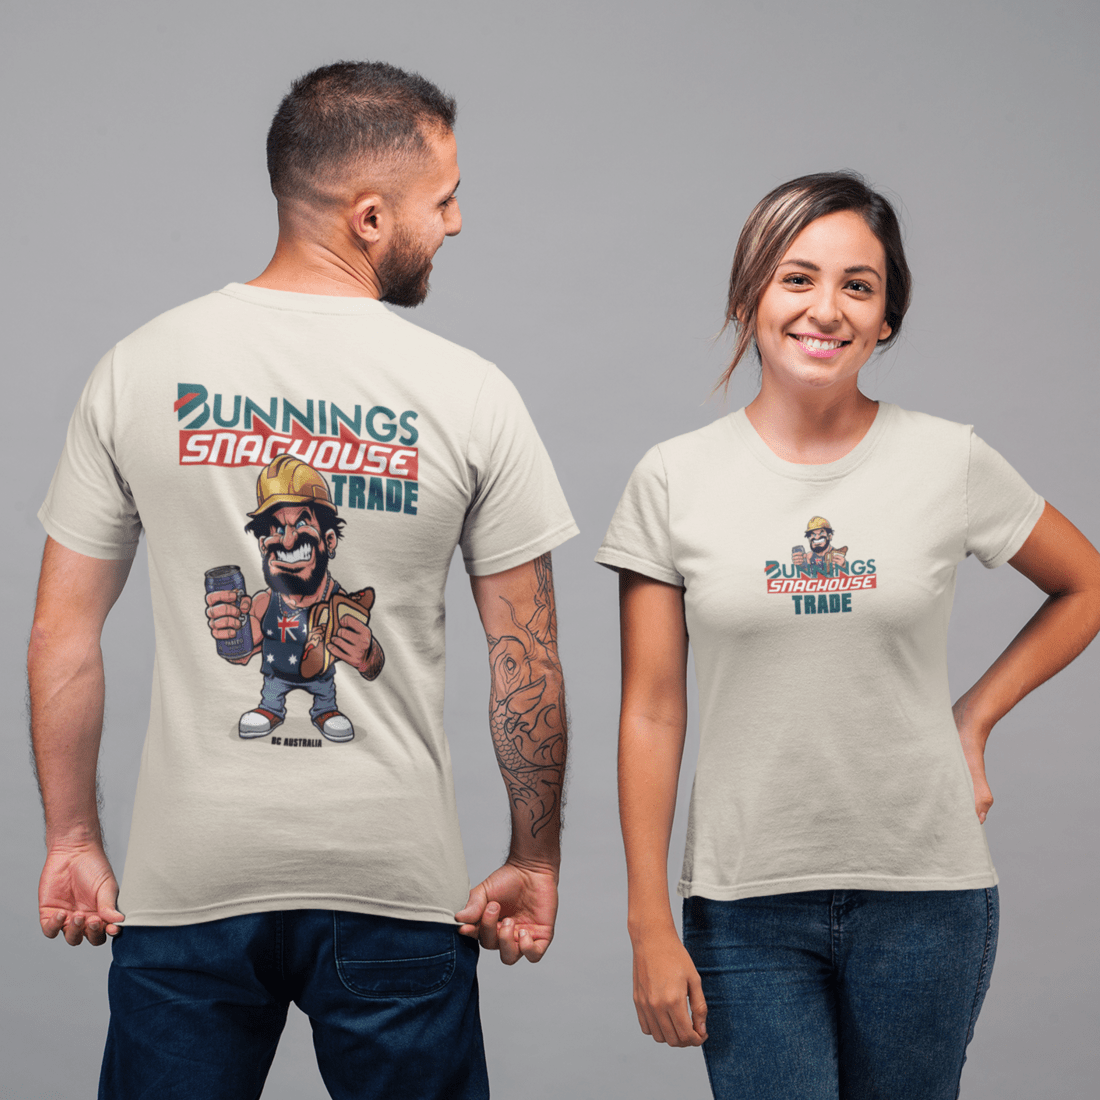 Bunnings Snaghouse Trade T-SHIRT | Funny Aussie T-Shirts